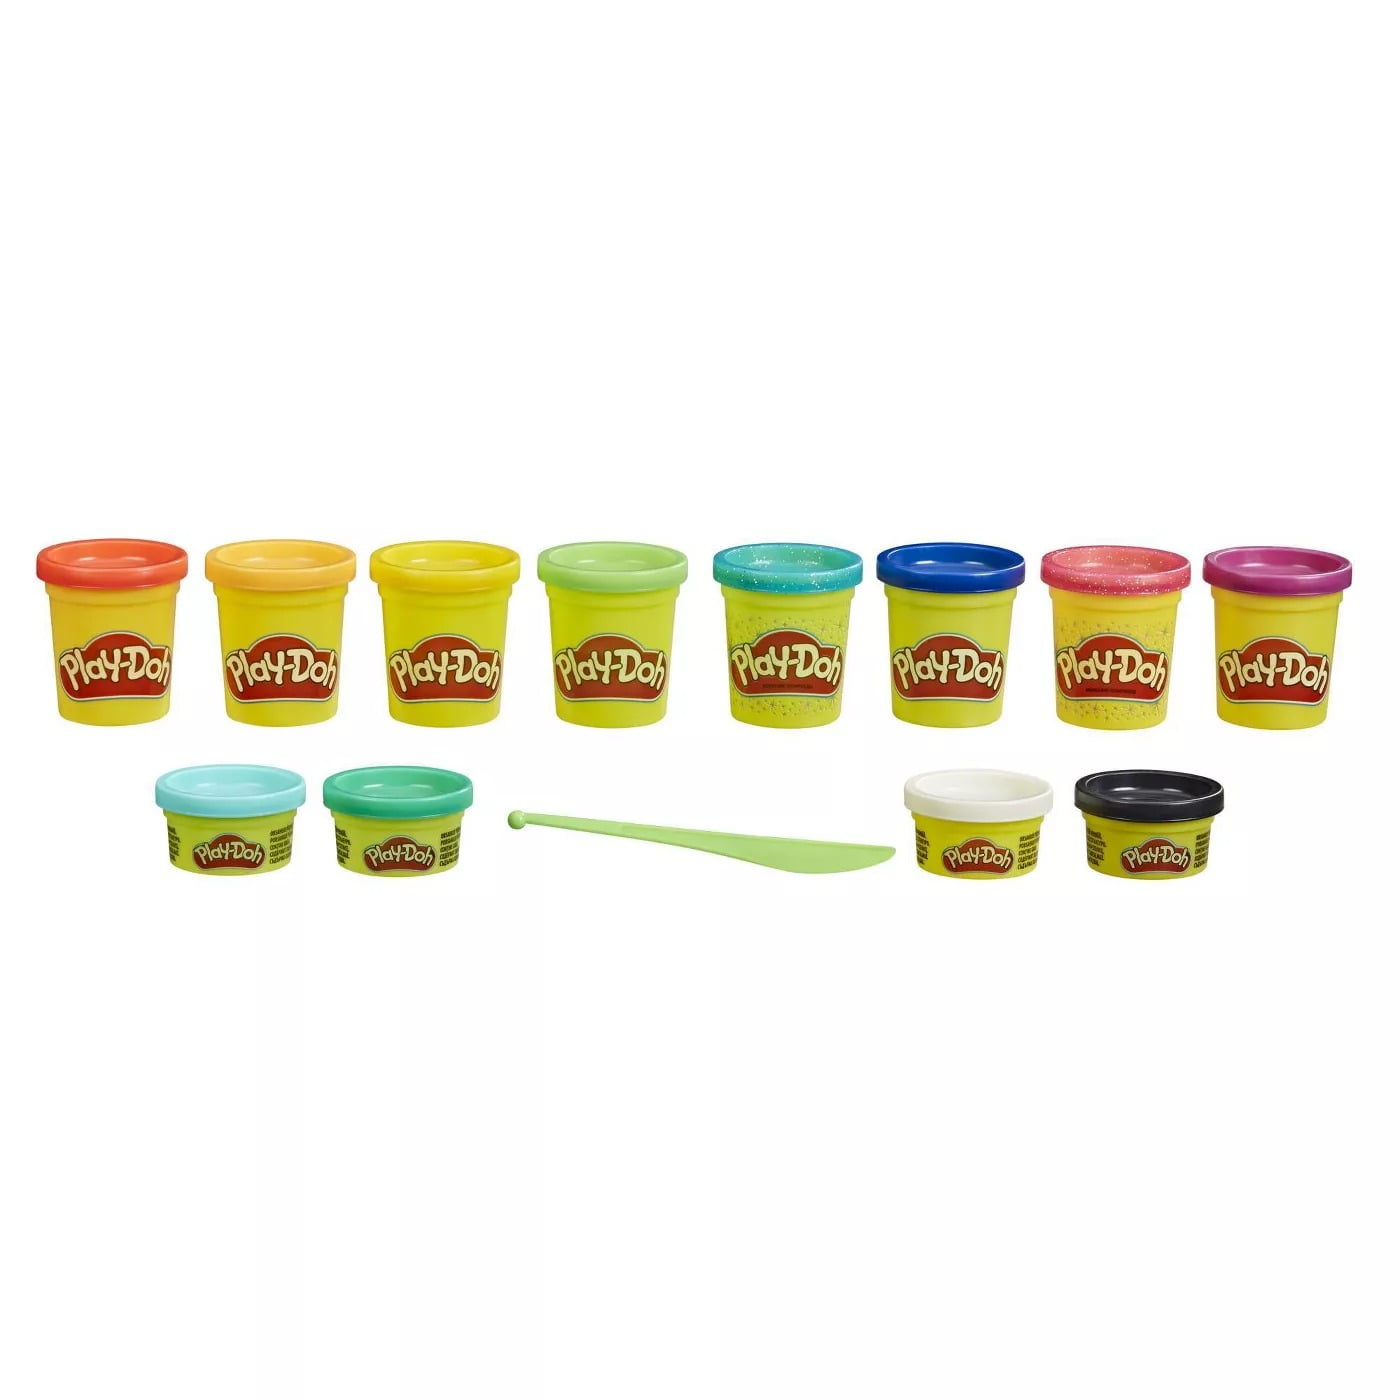 Play-doh Bright Delights 12-pack : Target